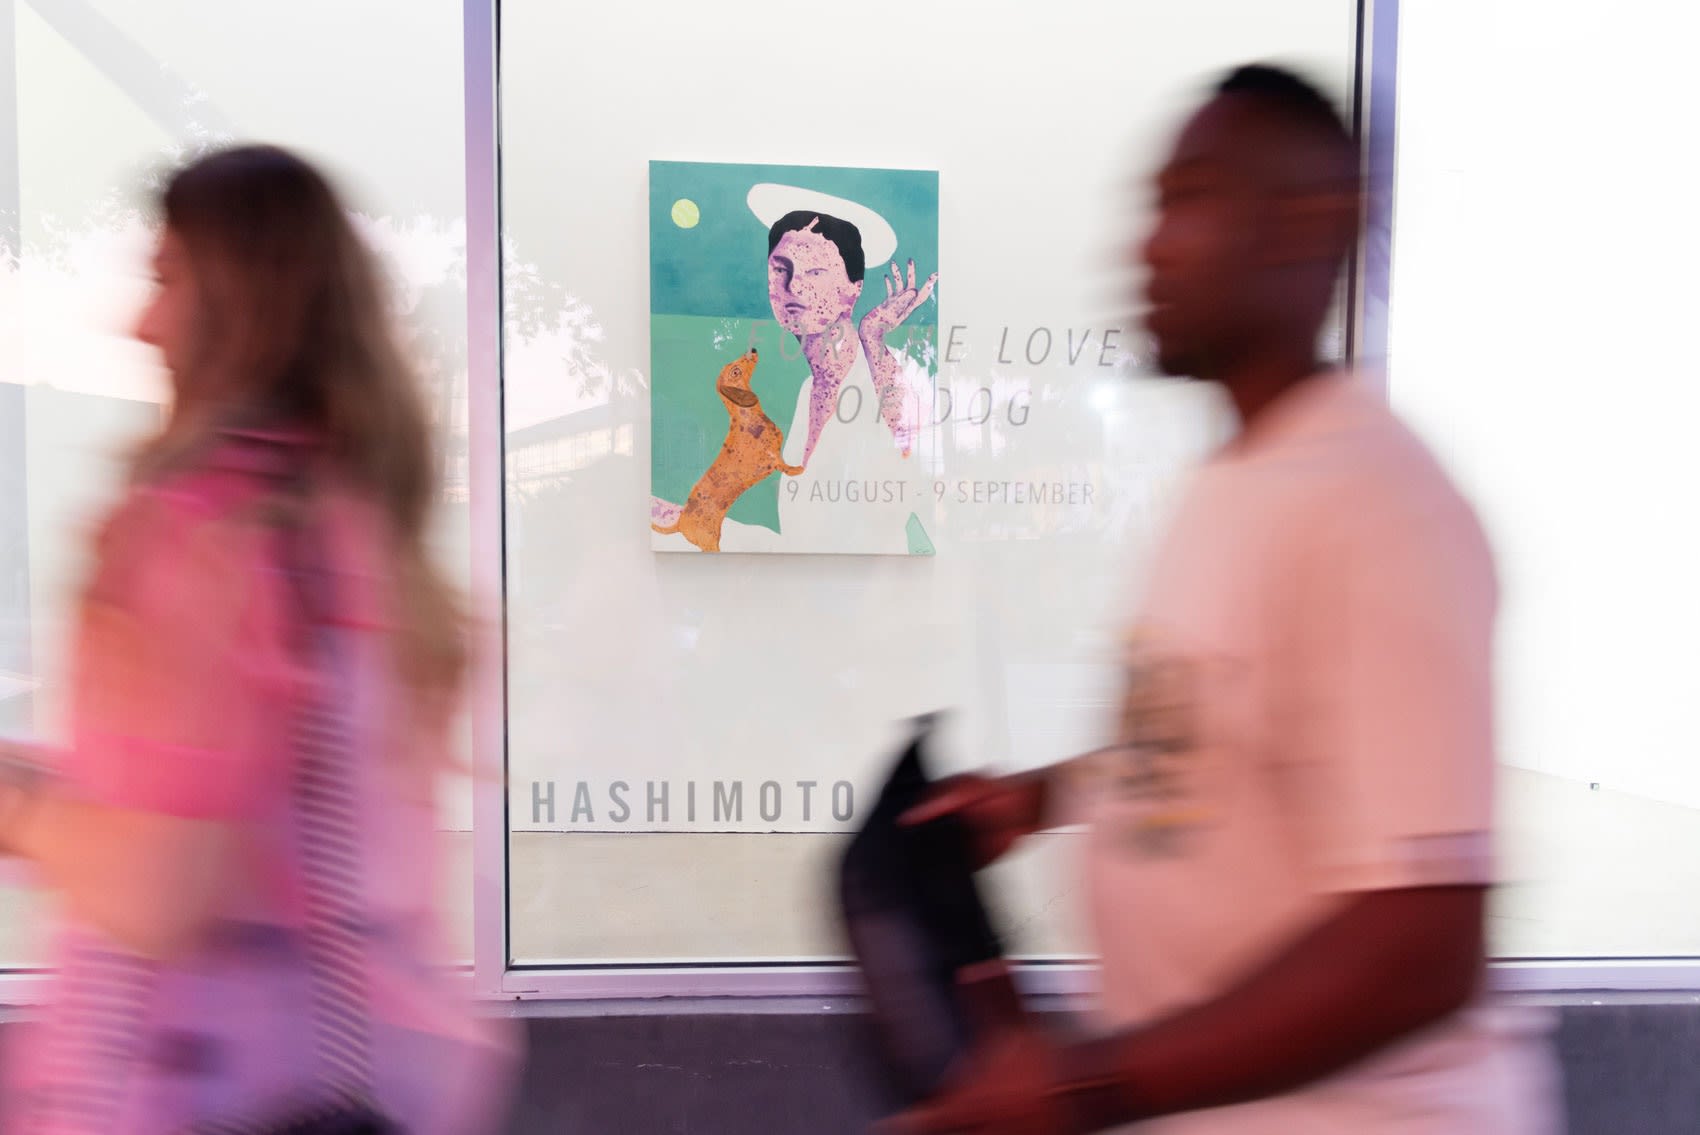 Erin Armstrong's painting of a woman in a hot with a wienr dog is seen through a window as two blurry people walk past